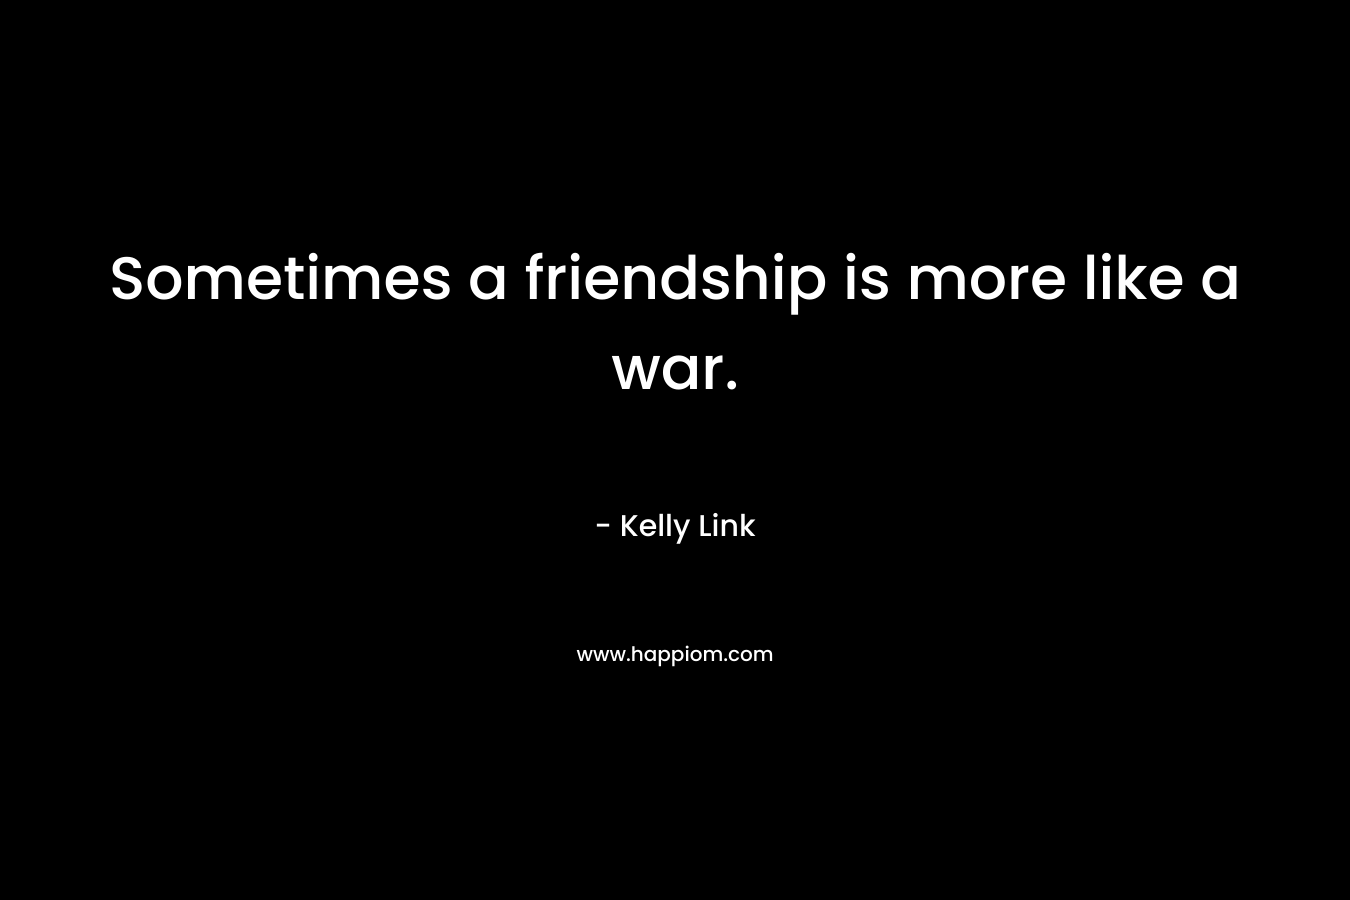 Sometimes a friendship is more like a war.